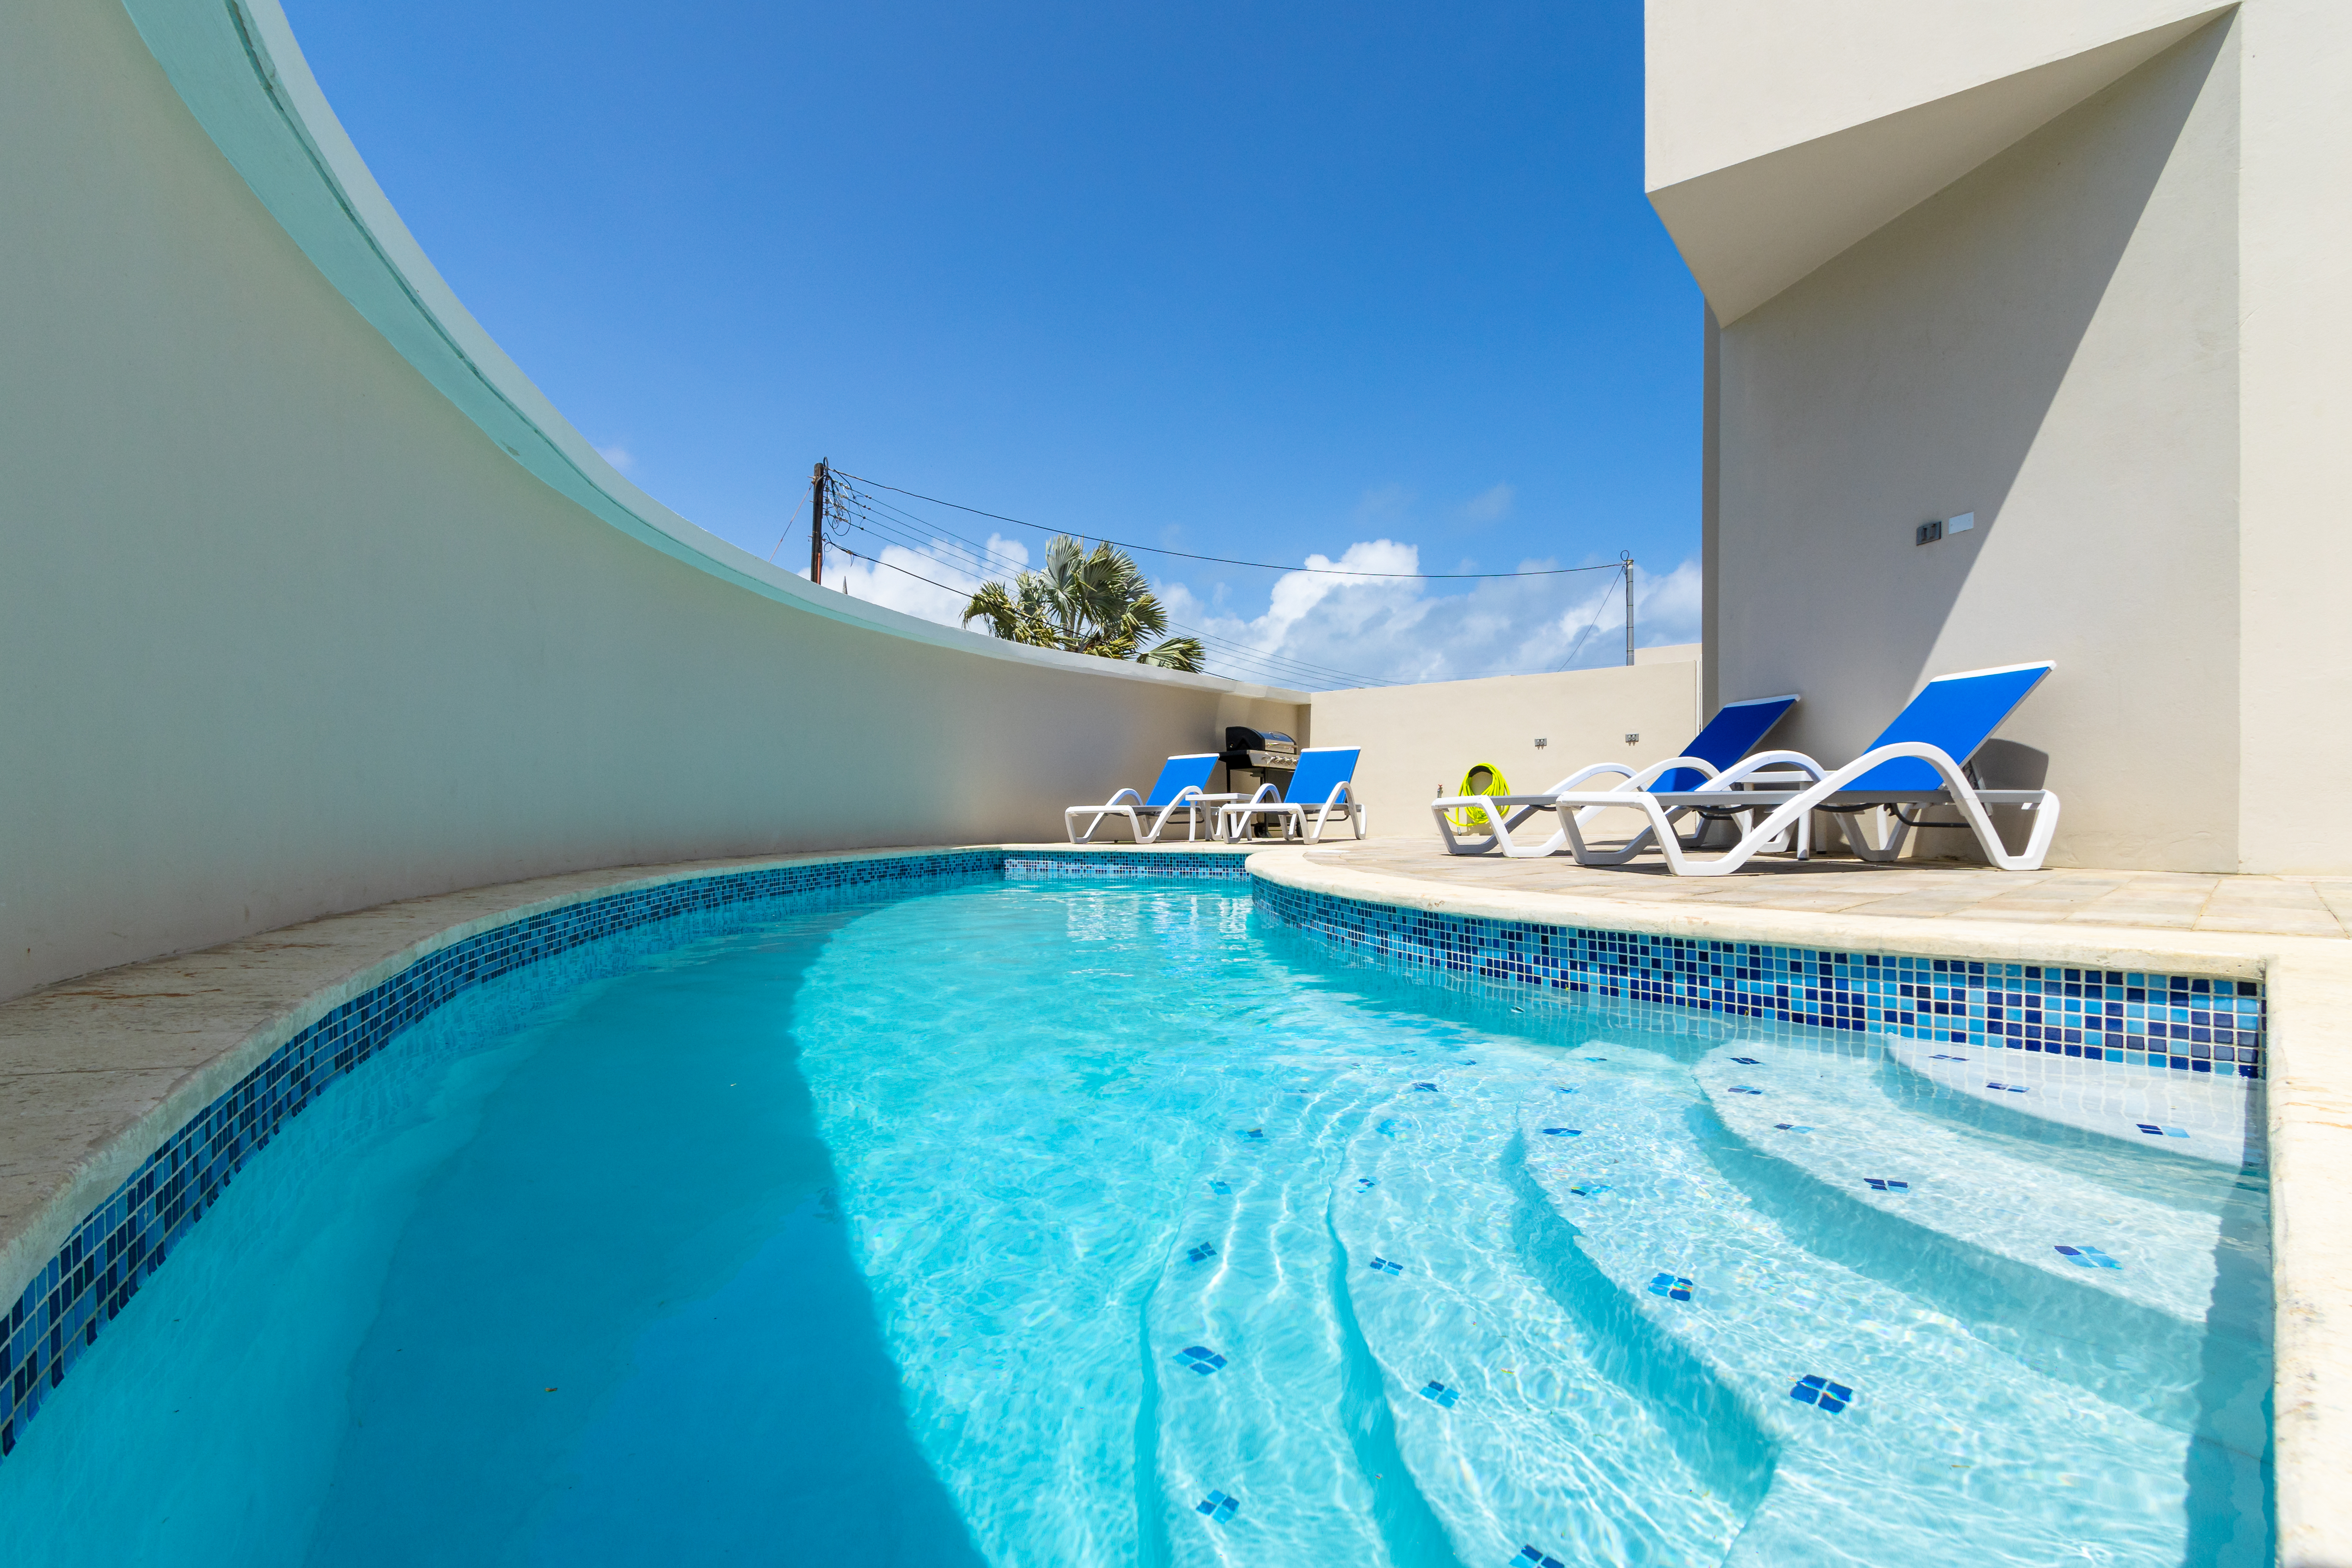 Lavish Private Pool Area of the Apartment in Noord Aruba - Enjoy leisurely moments in our inviting pool area - Comfortable Beach Chairs - Crystal Clear Water